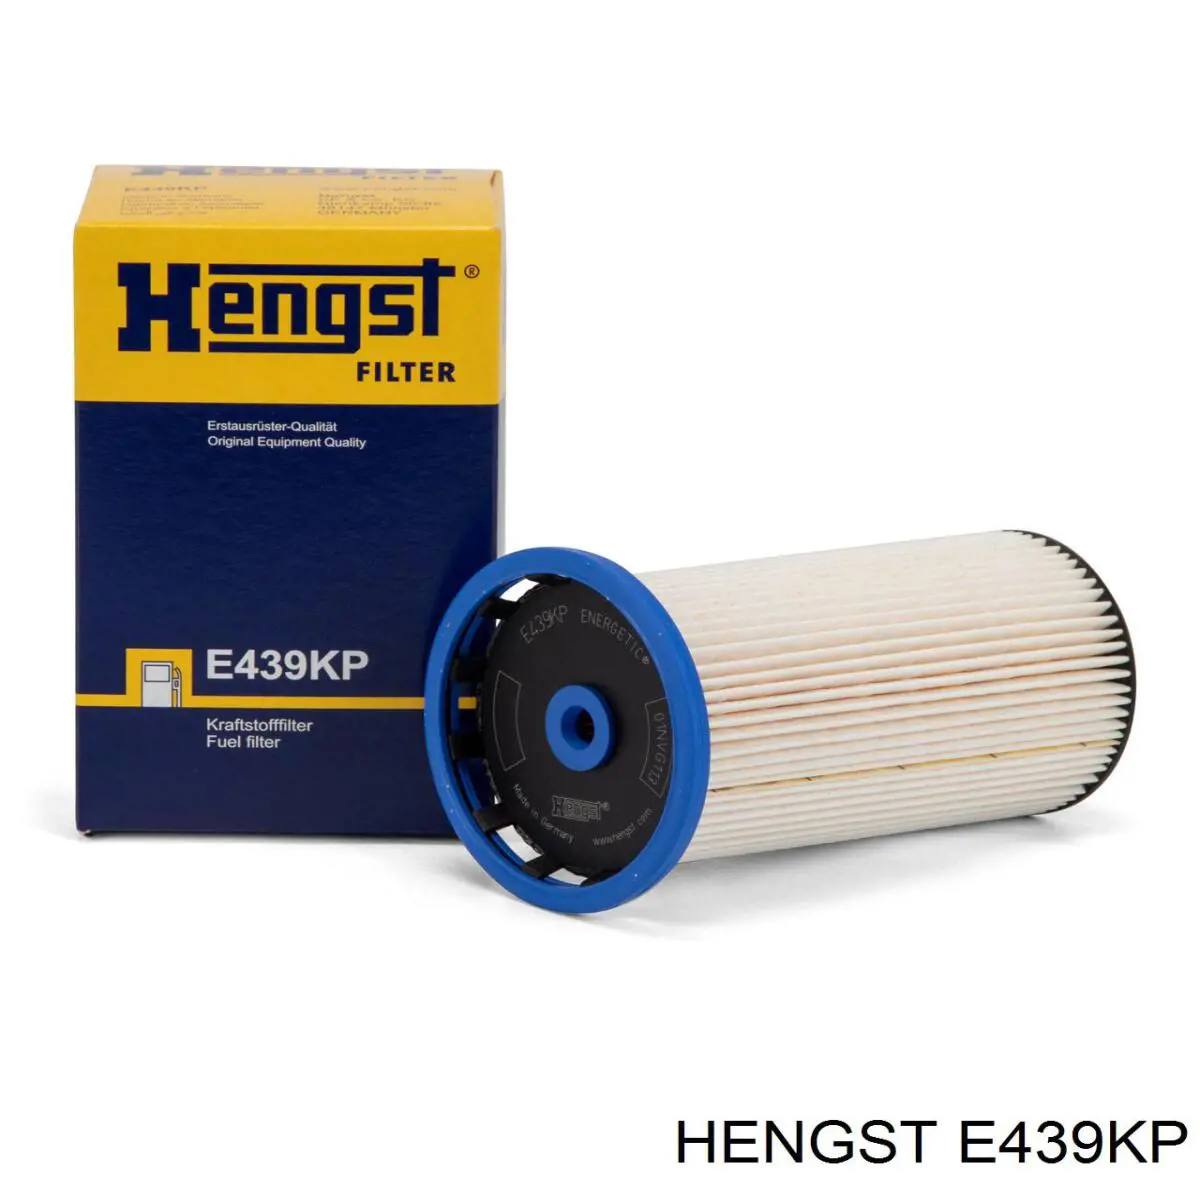 Filtro combustible E439KP Hengst